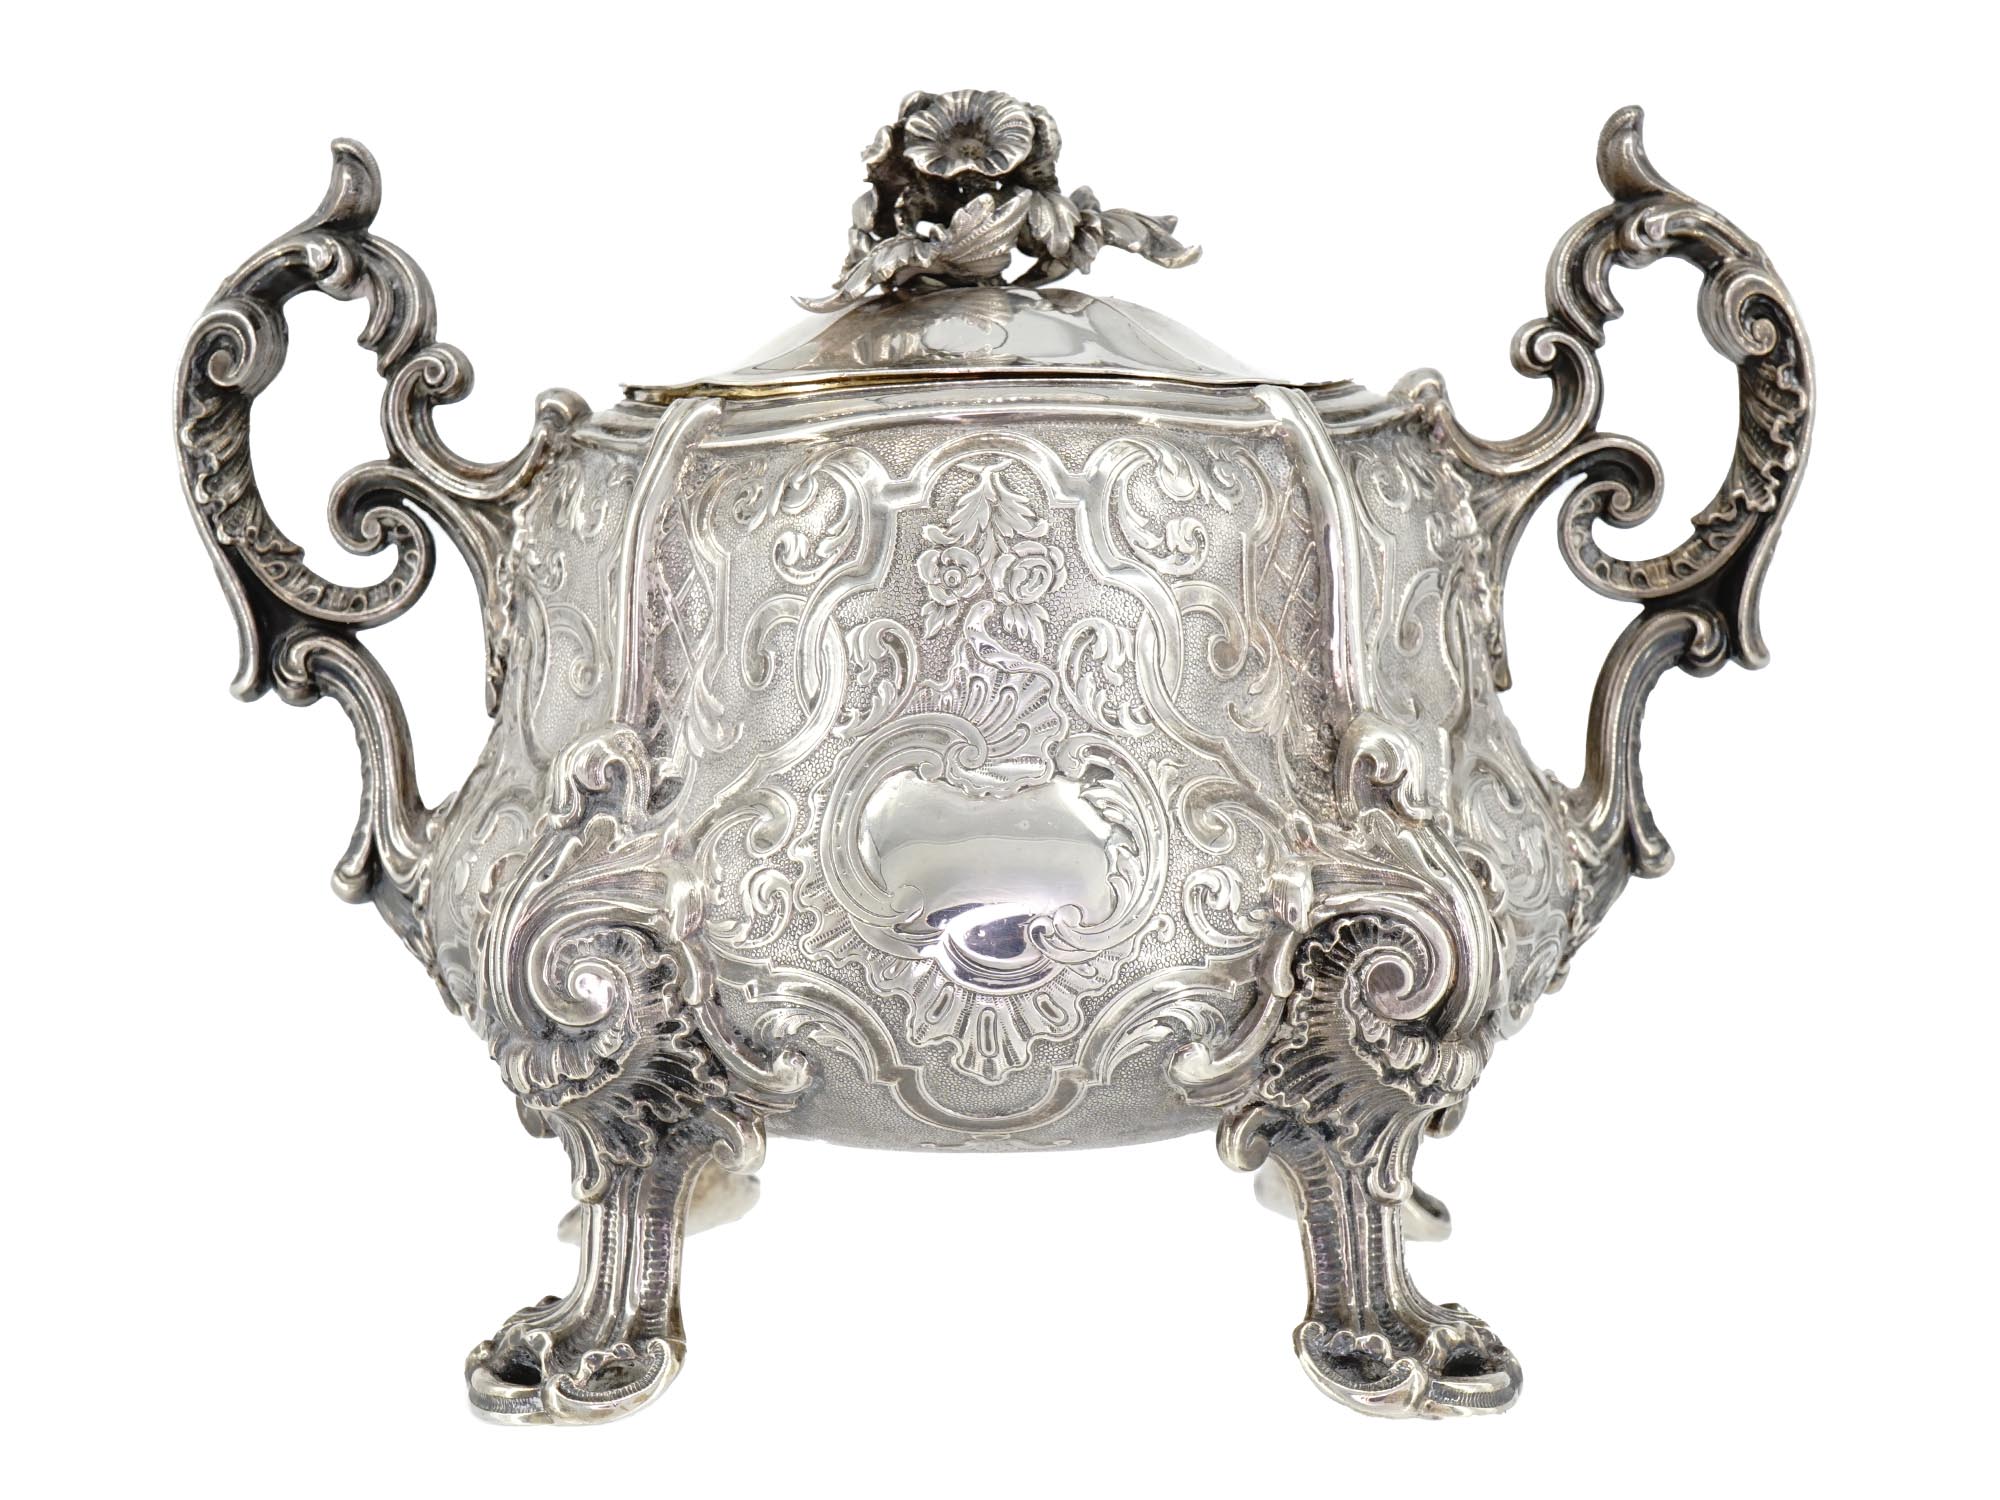 ANTIQUE FRENCH SILVER LIDDED SUGAR BOWL BY ODIOT PIC-1